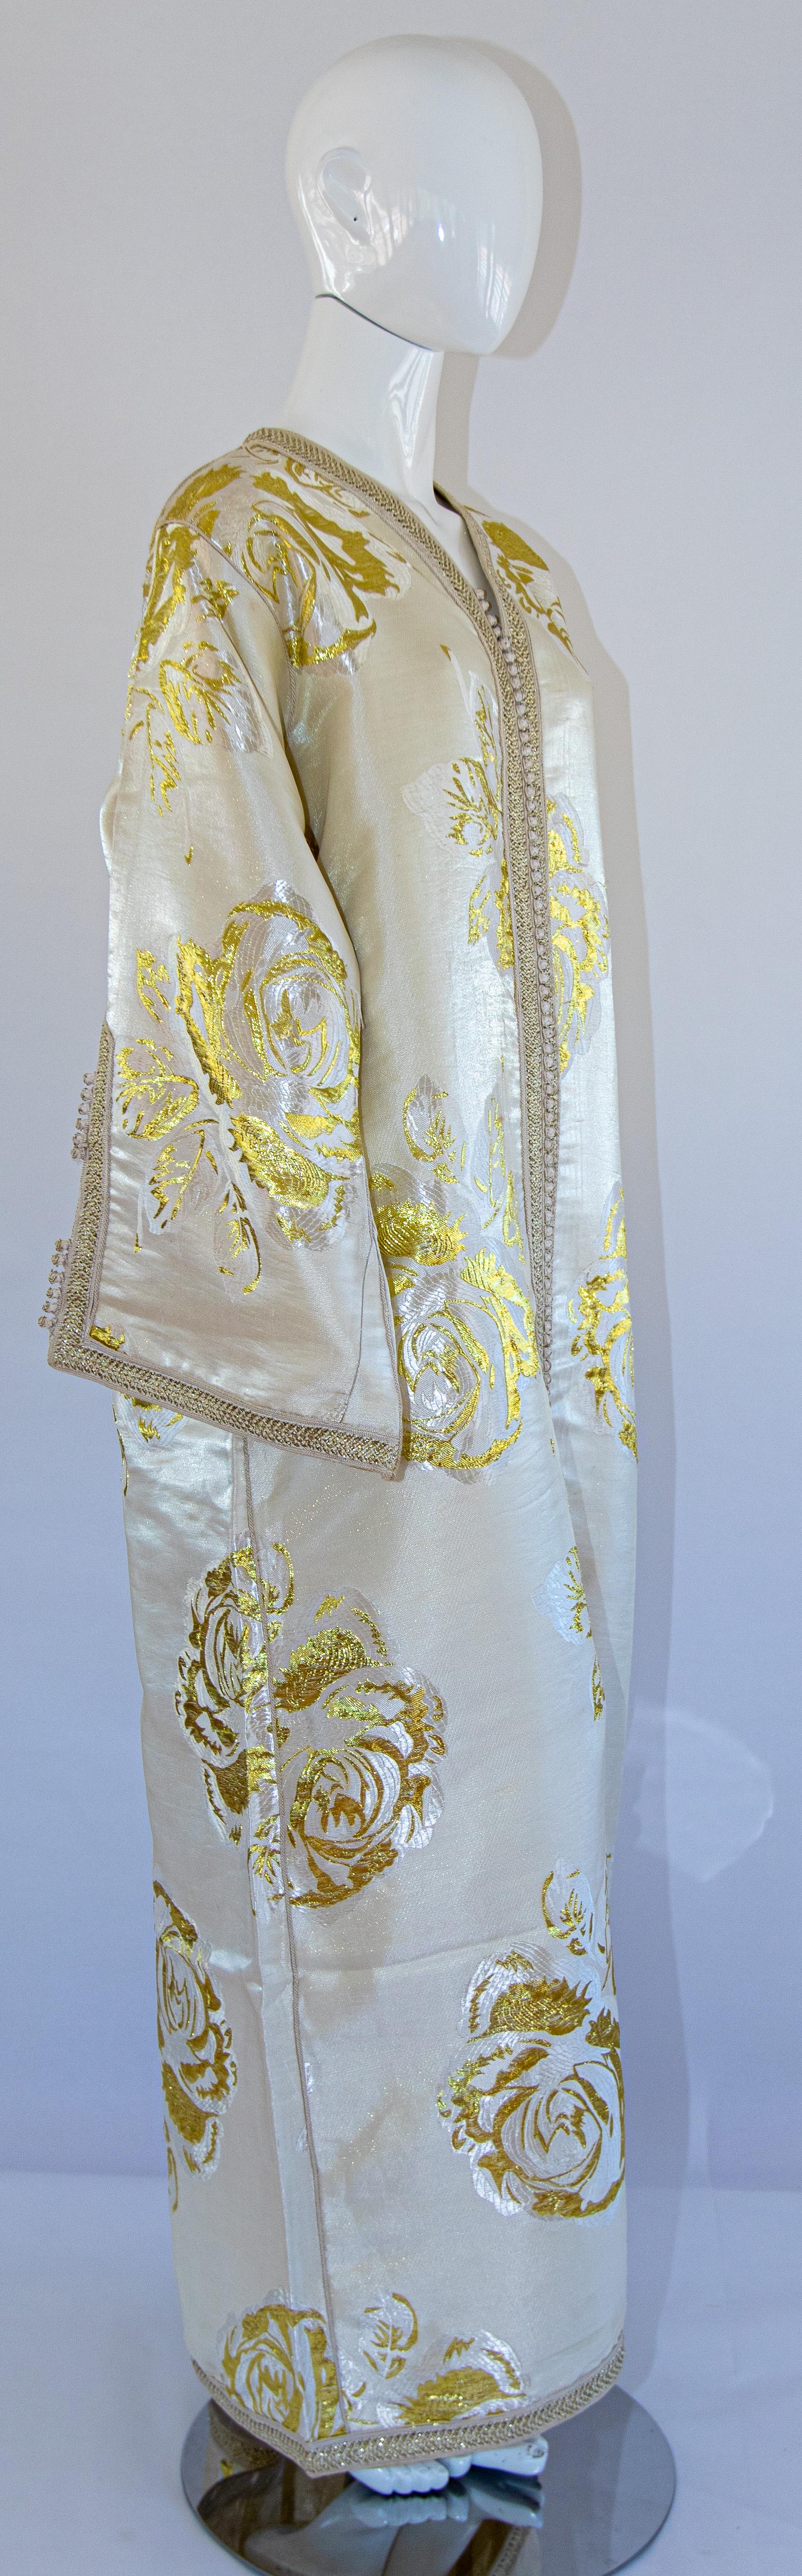 Vintage Moroccan Caftan White and Gold Metallic Floral Brocade For Sale 6